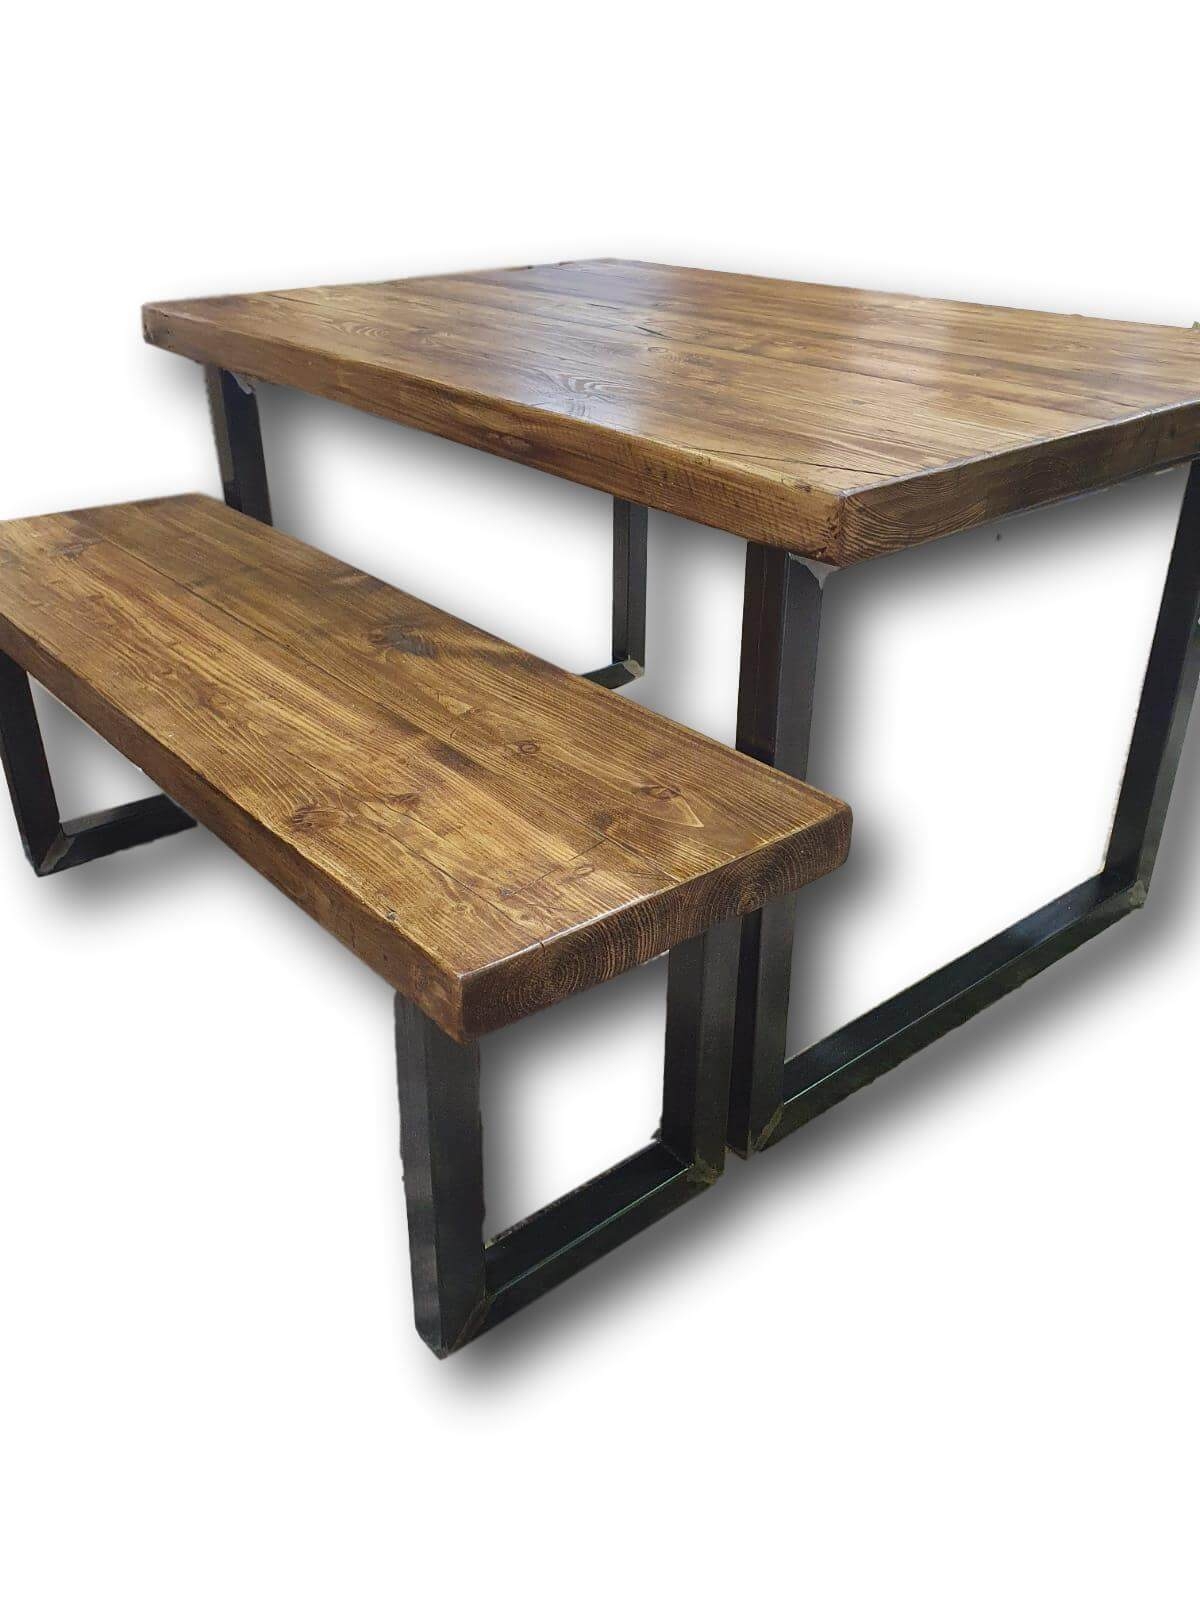 The Reclaimed Rustic Weathered Table Oil Finish – Design Your Own Dining Table 170cm x 90cm1 bench (to fit between table legs) – Acumen Collection